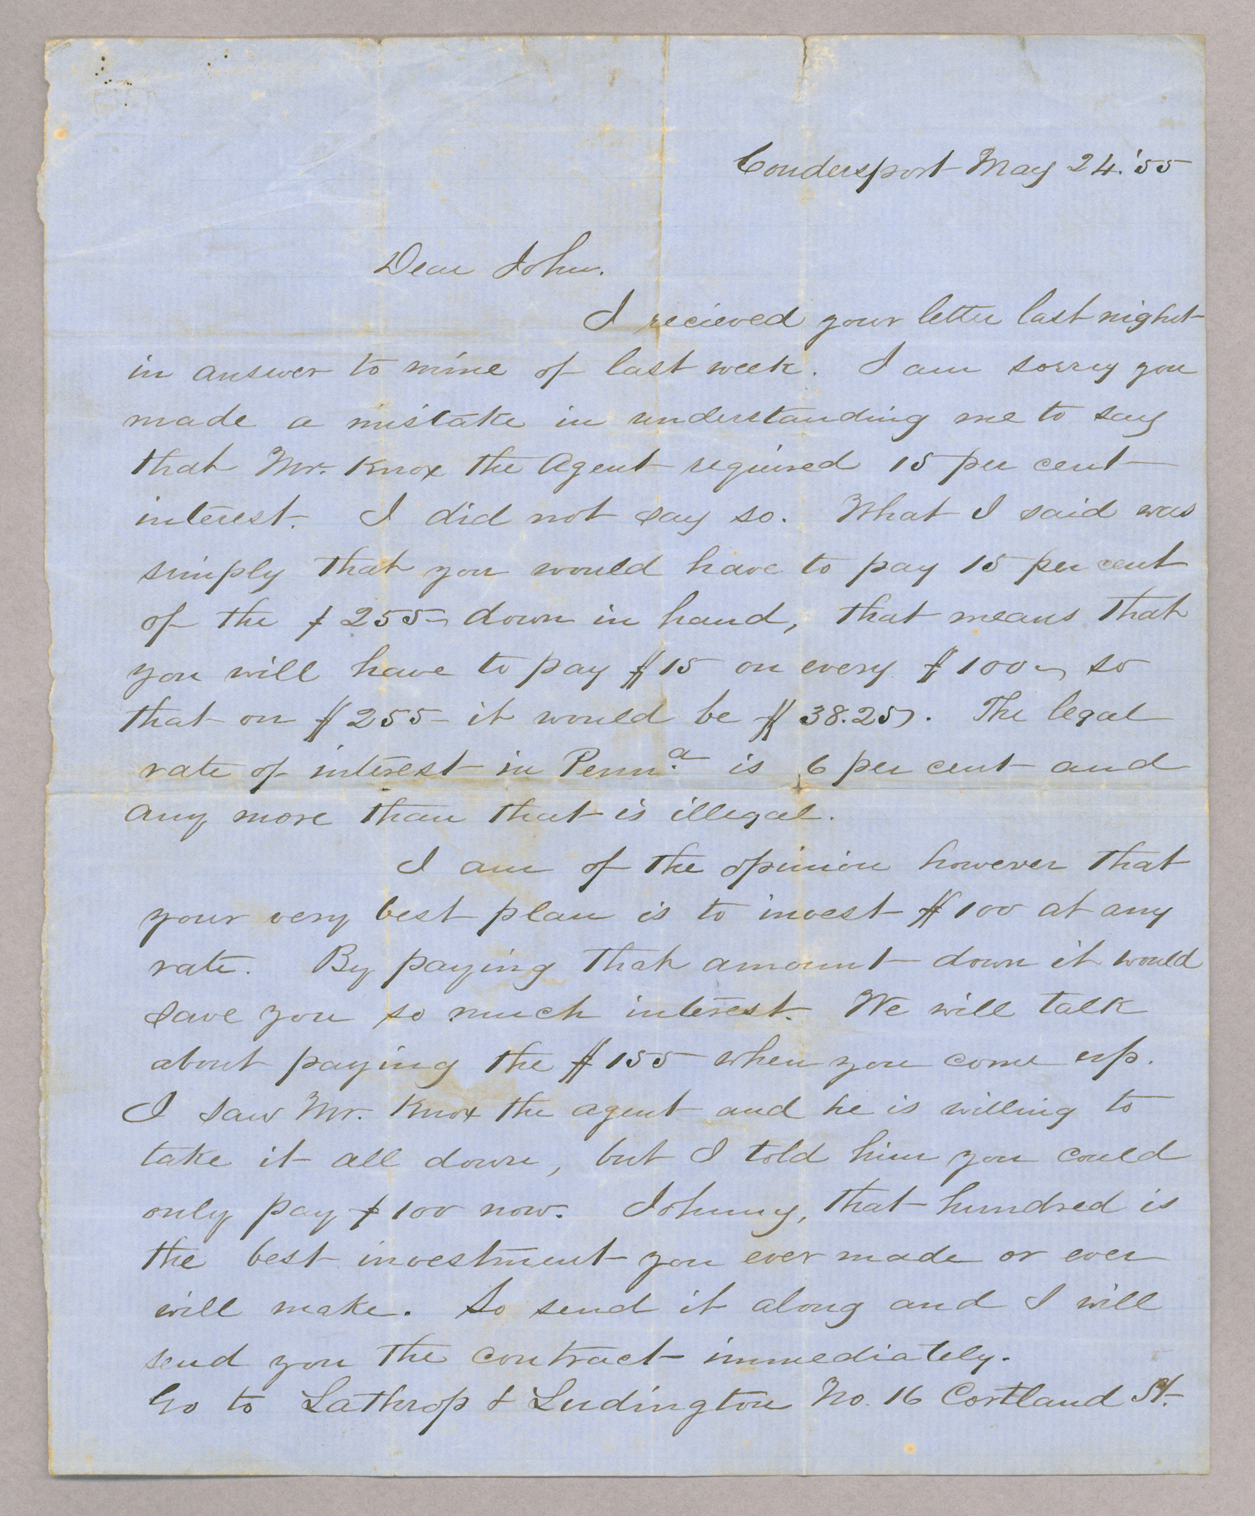 Letter. Hugh Young, Coudersport, Pennsylvania, to "Dear John" [John E. Brownlee], n. p., Page 1